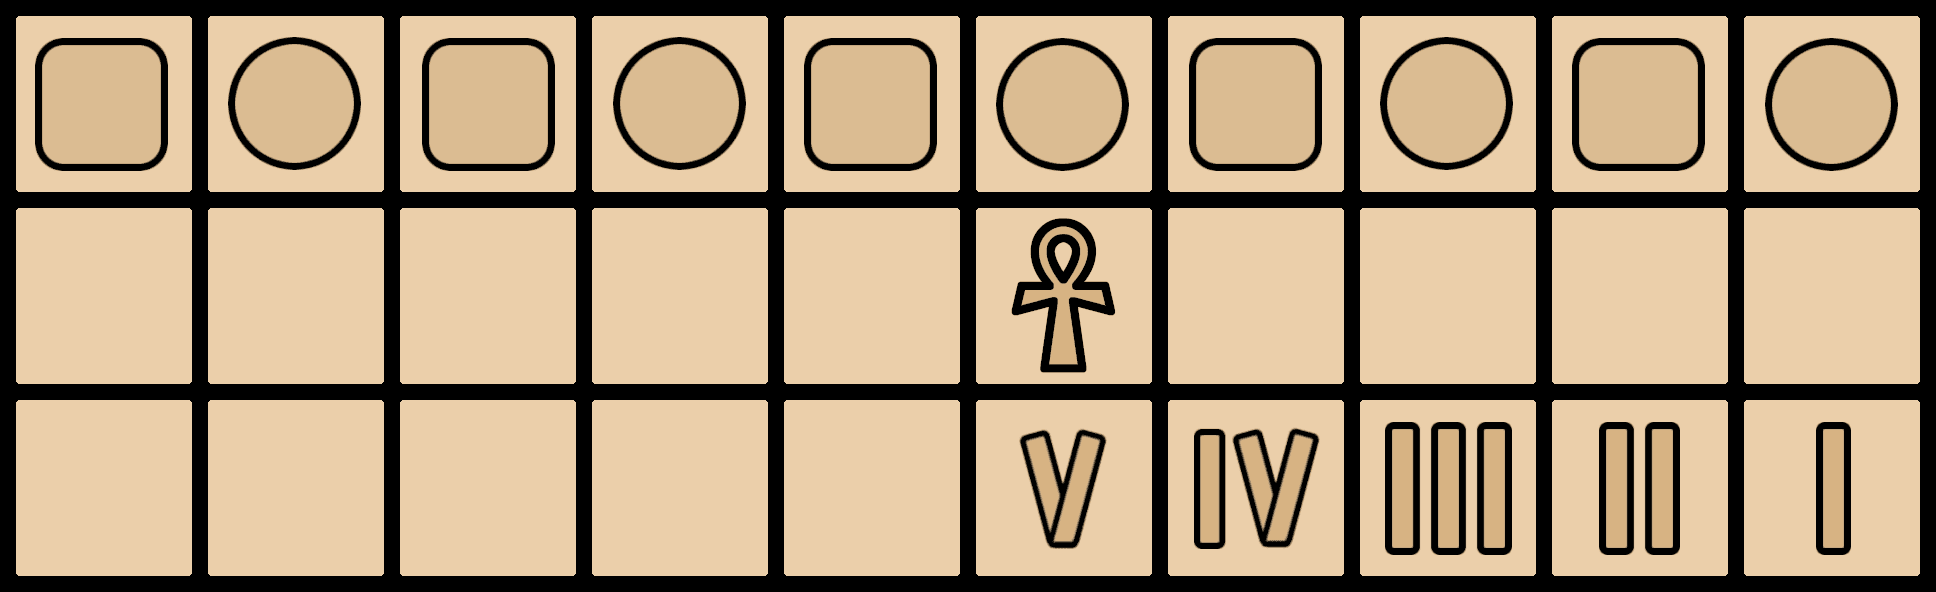 A Senet board with the starting positions of pieces marked, and the special center and end tiles marked